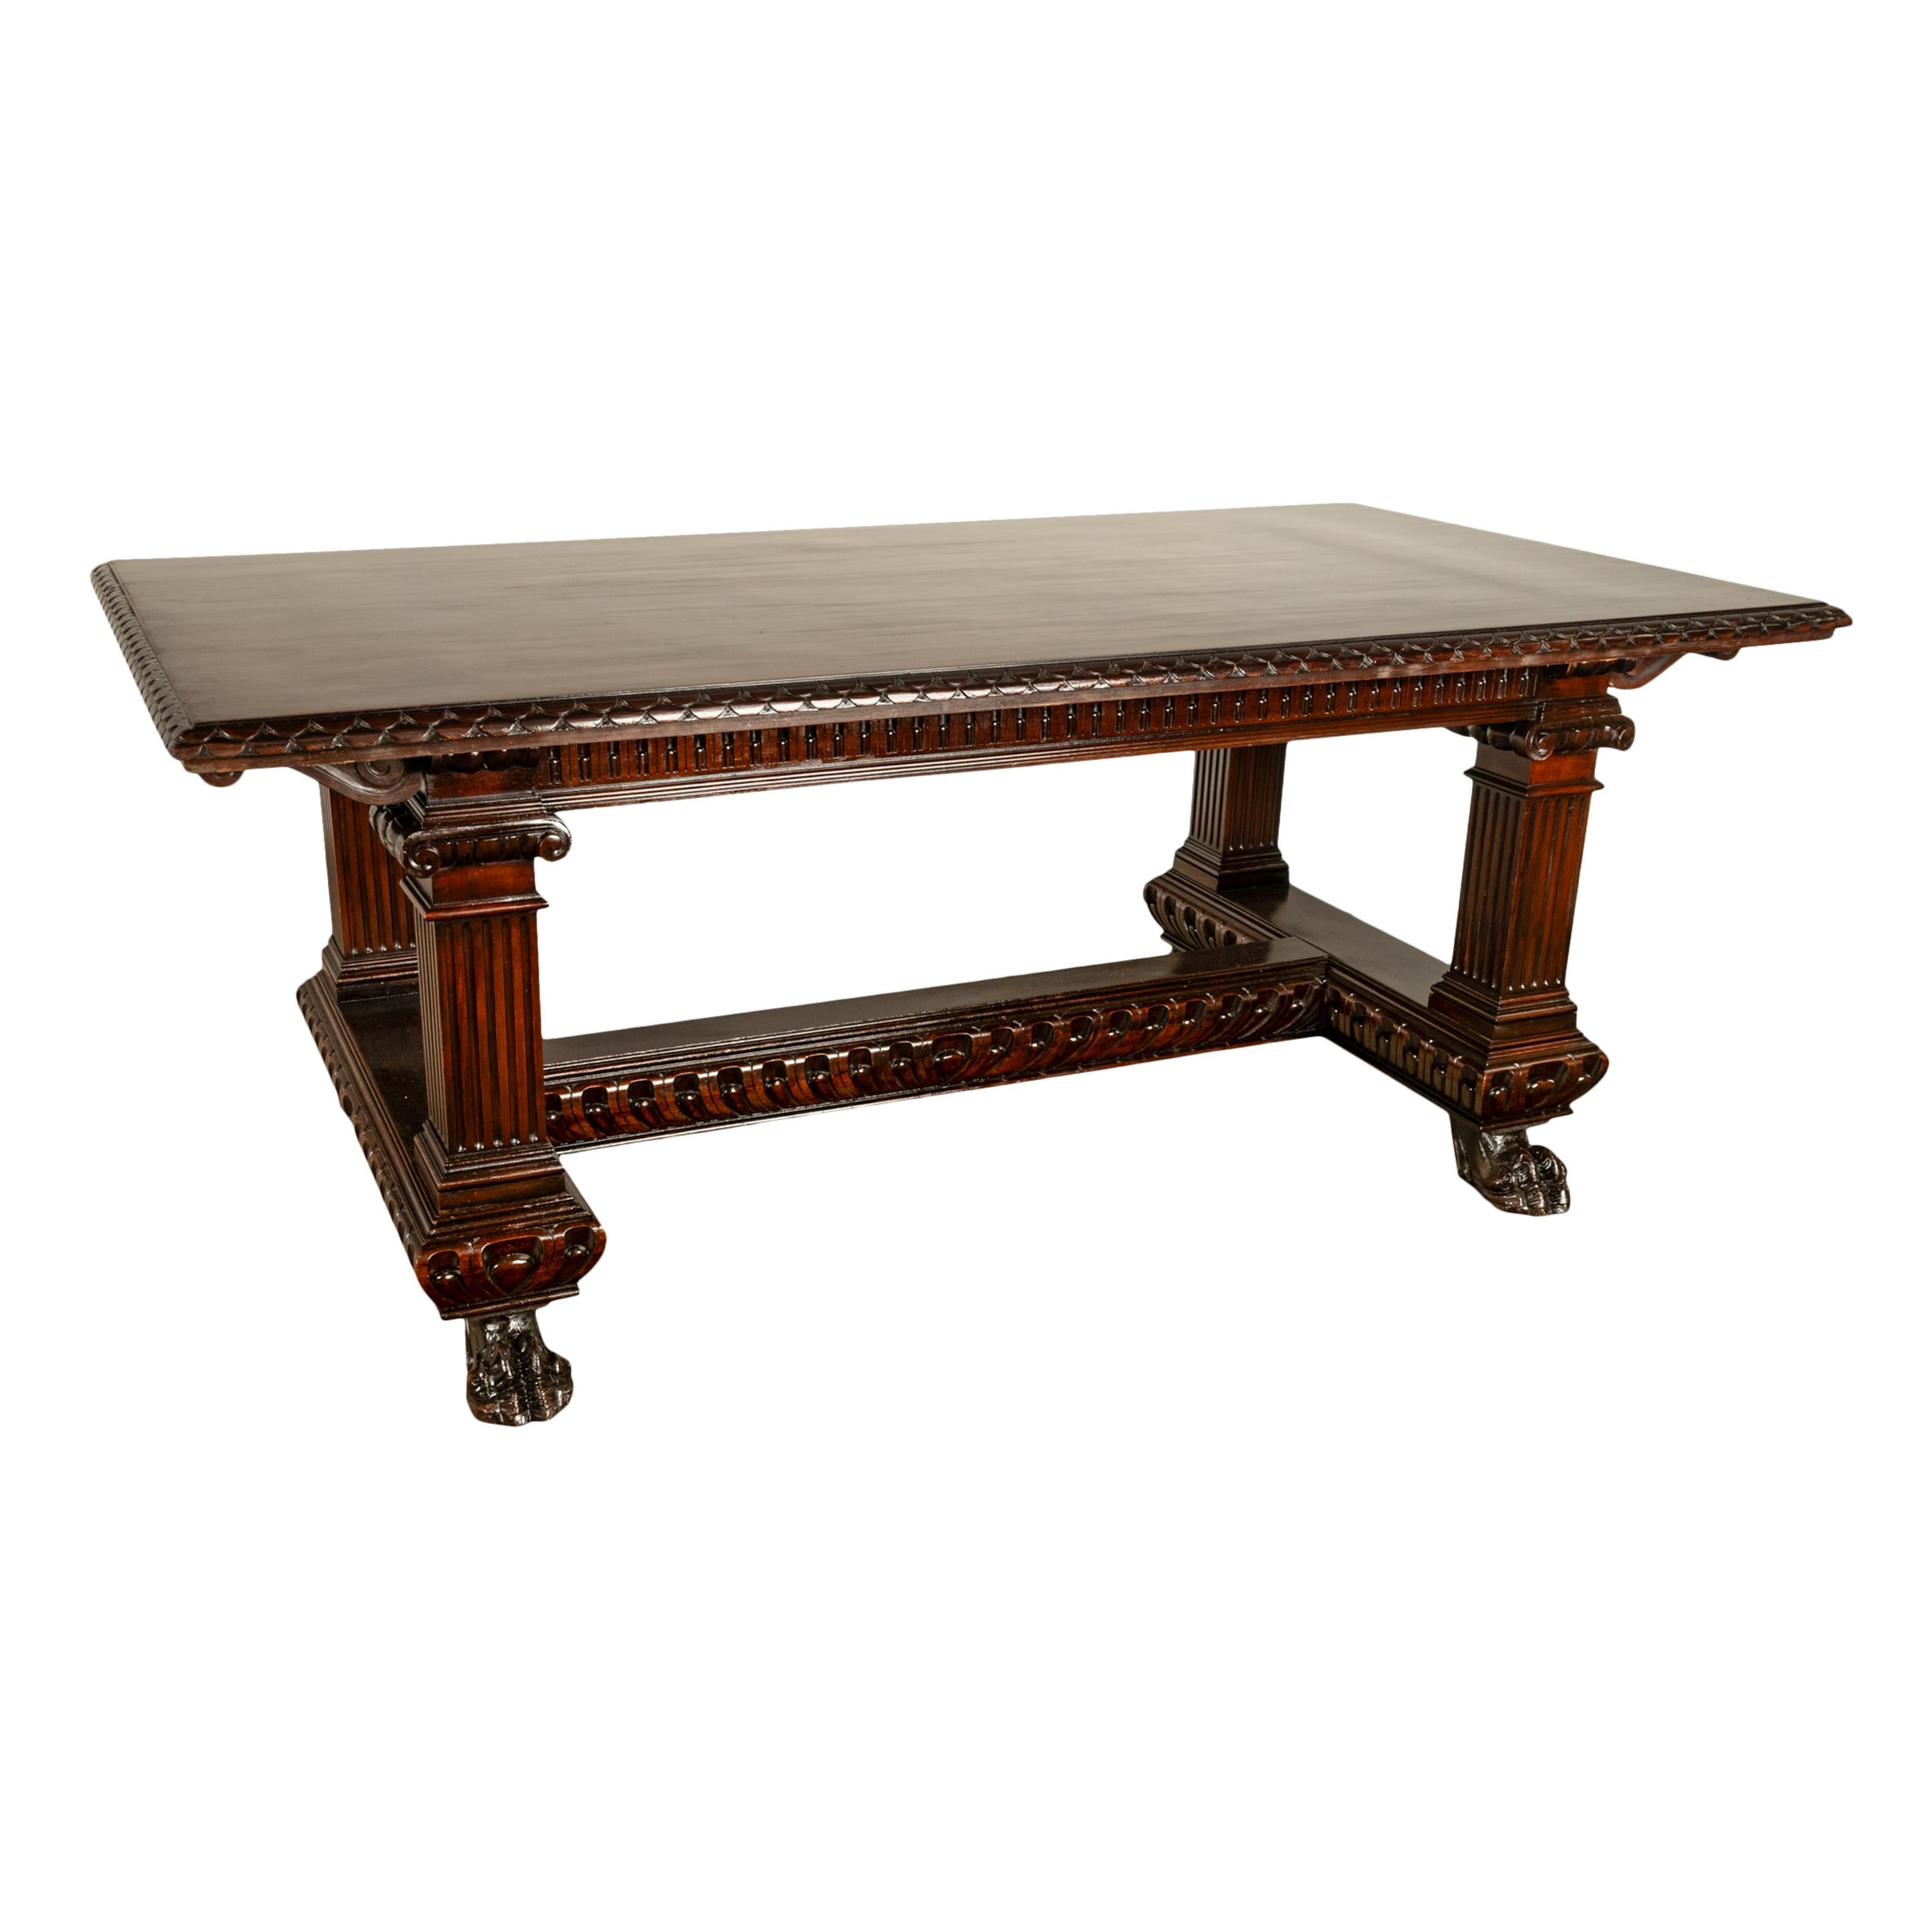 Antique Italian Carved Renaissance Revival Walnut Library Dining Table 1880 For Sale 10